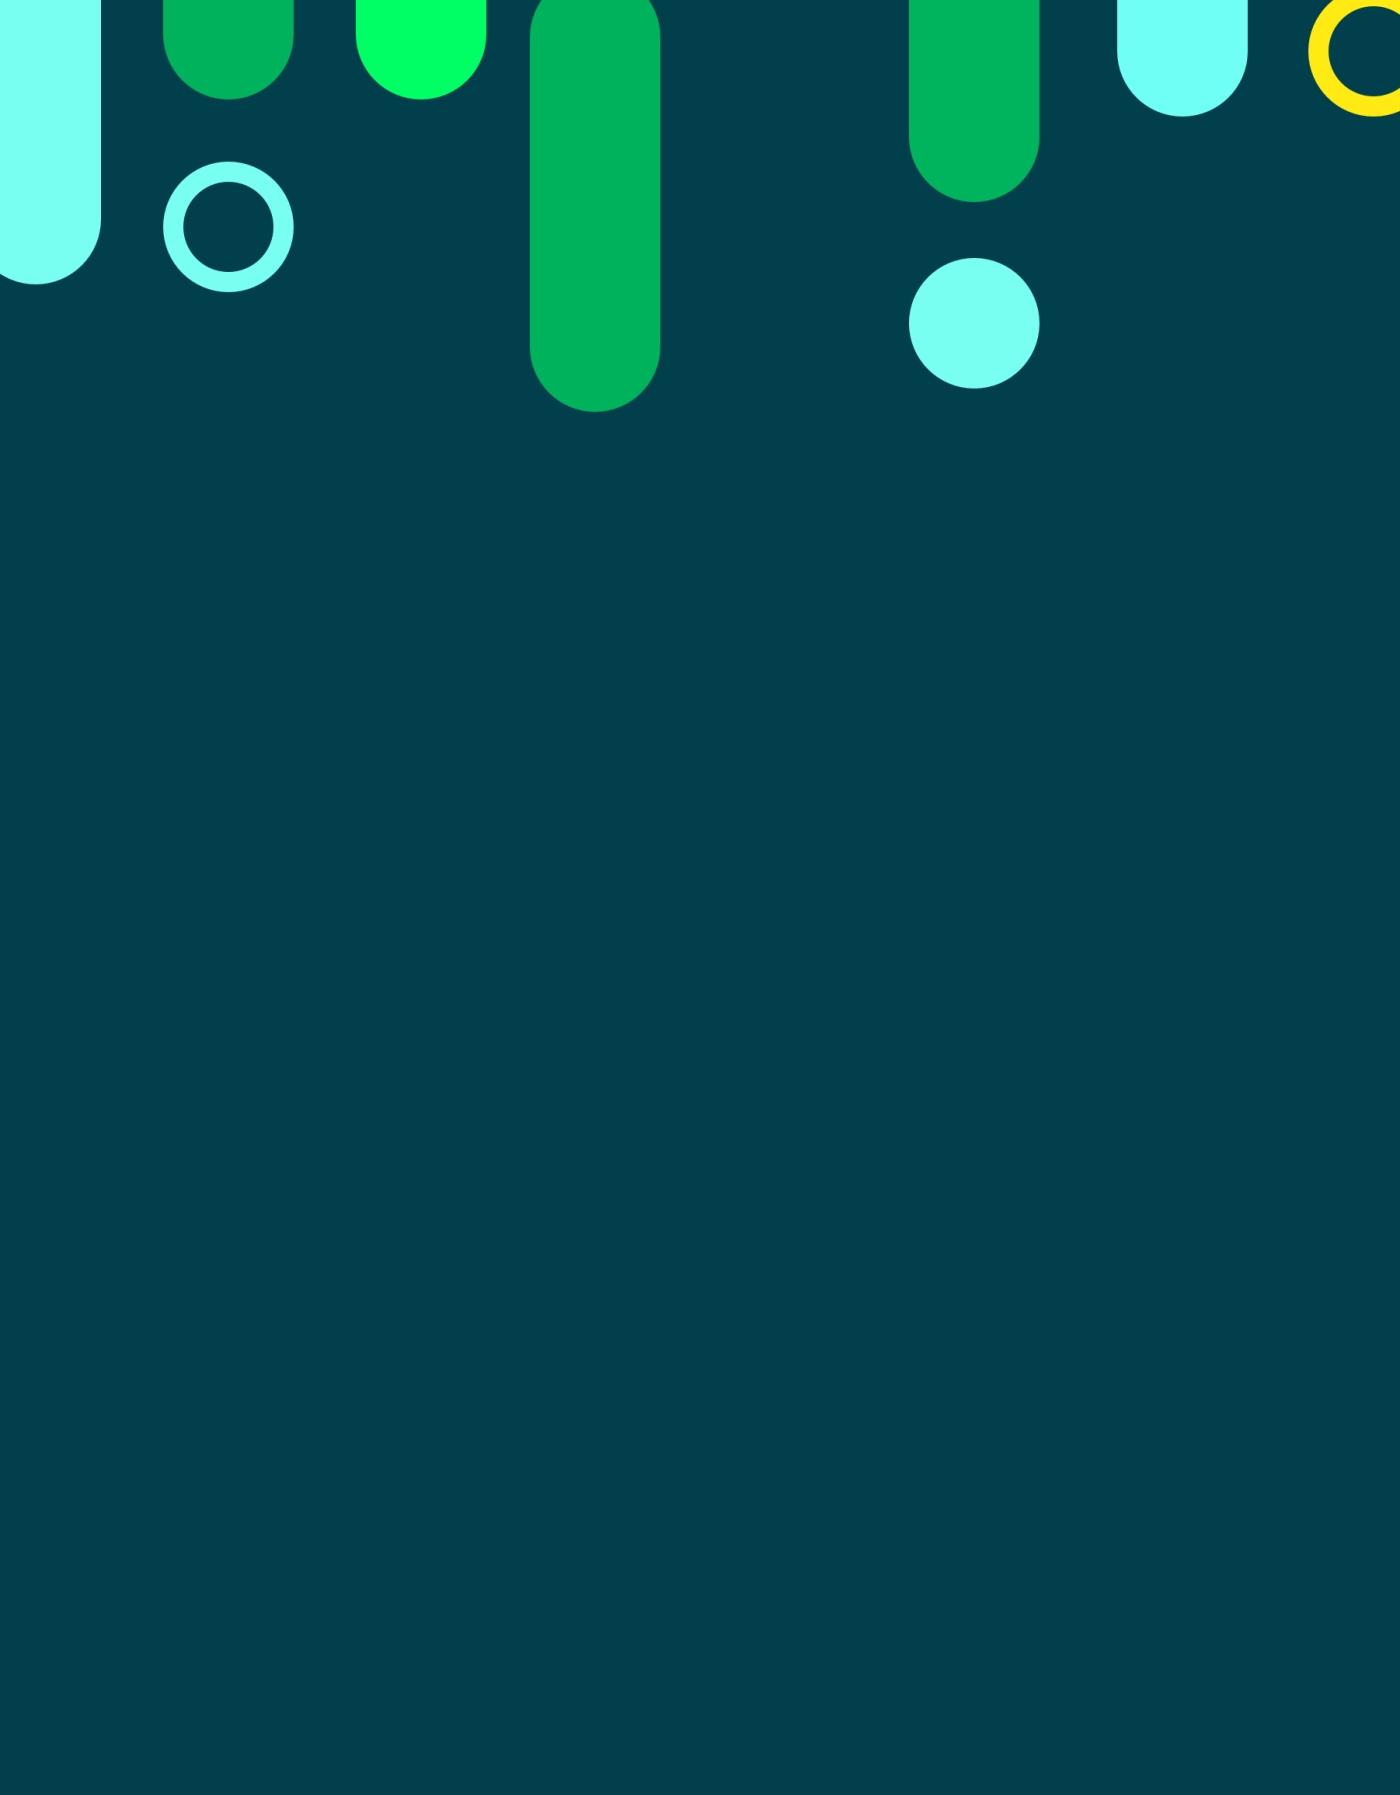 teal banner with neon green, cyan and yellow pills and circles that feel digital